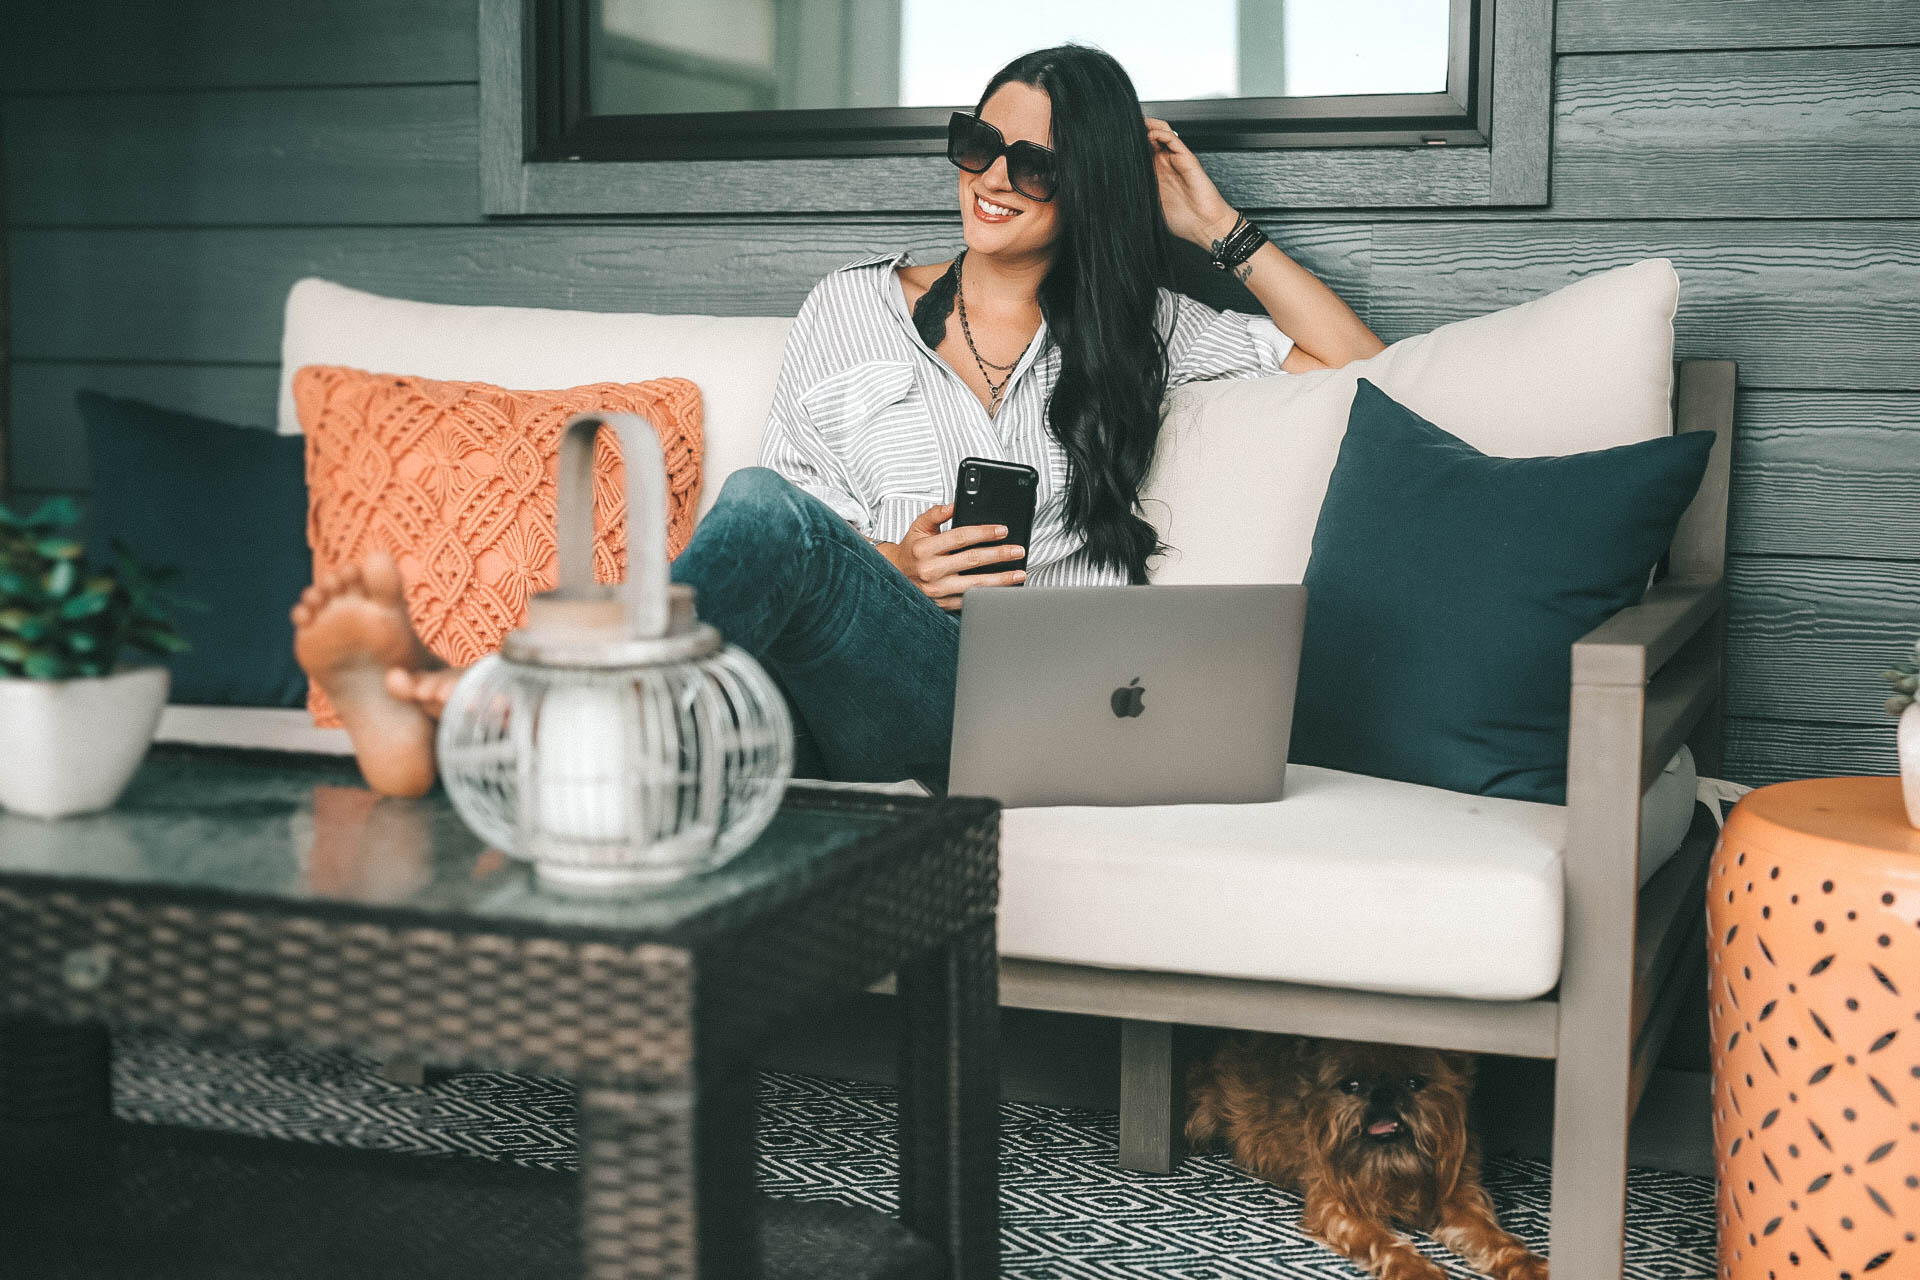 tips and tricks on how to successfully get more paid brand collaborations on your blog and Instagram as a blogger or influencer | {How to Get More Paid Brand Collaborations} featured by popular Austin Fashion blogger Dressed to Kill